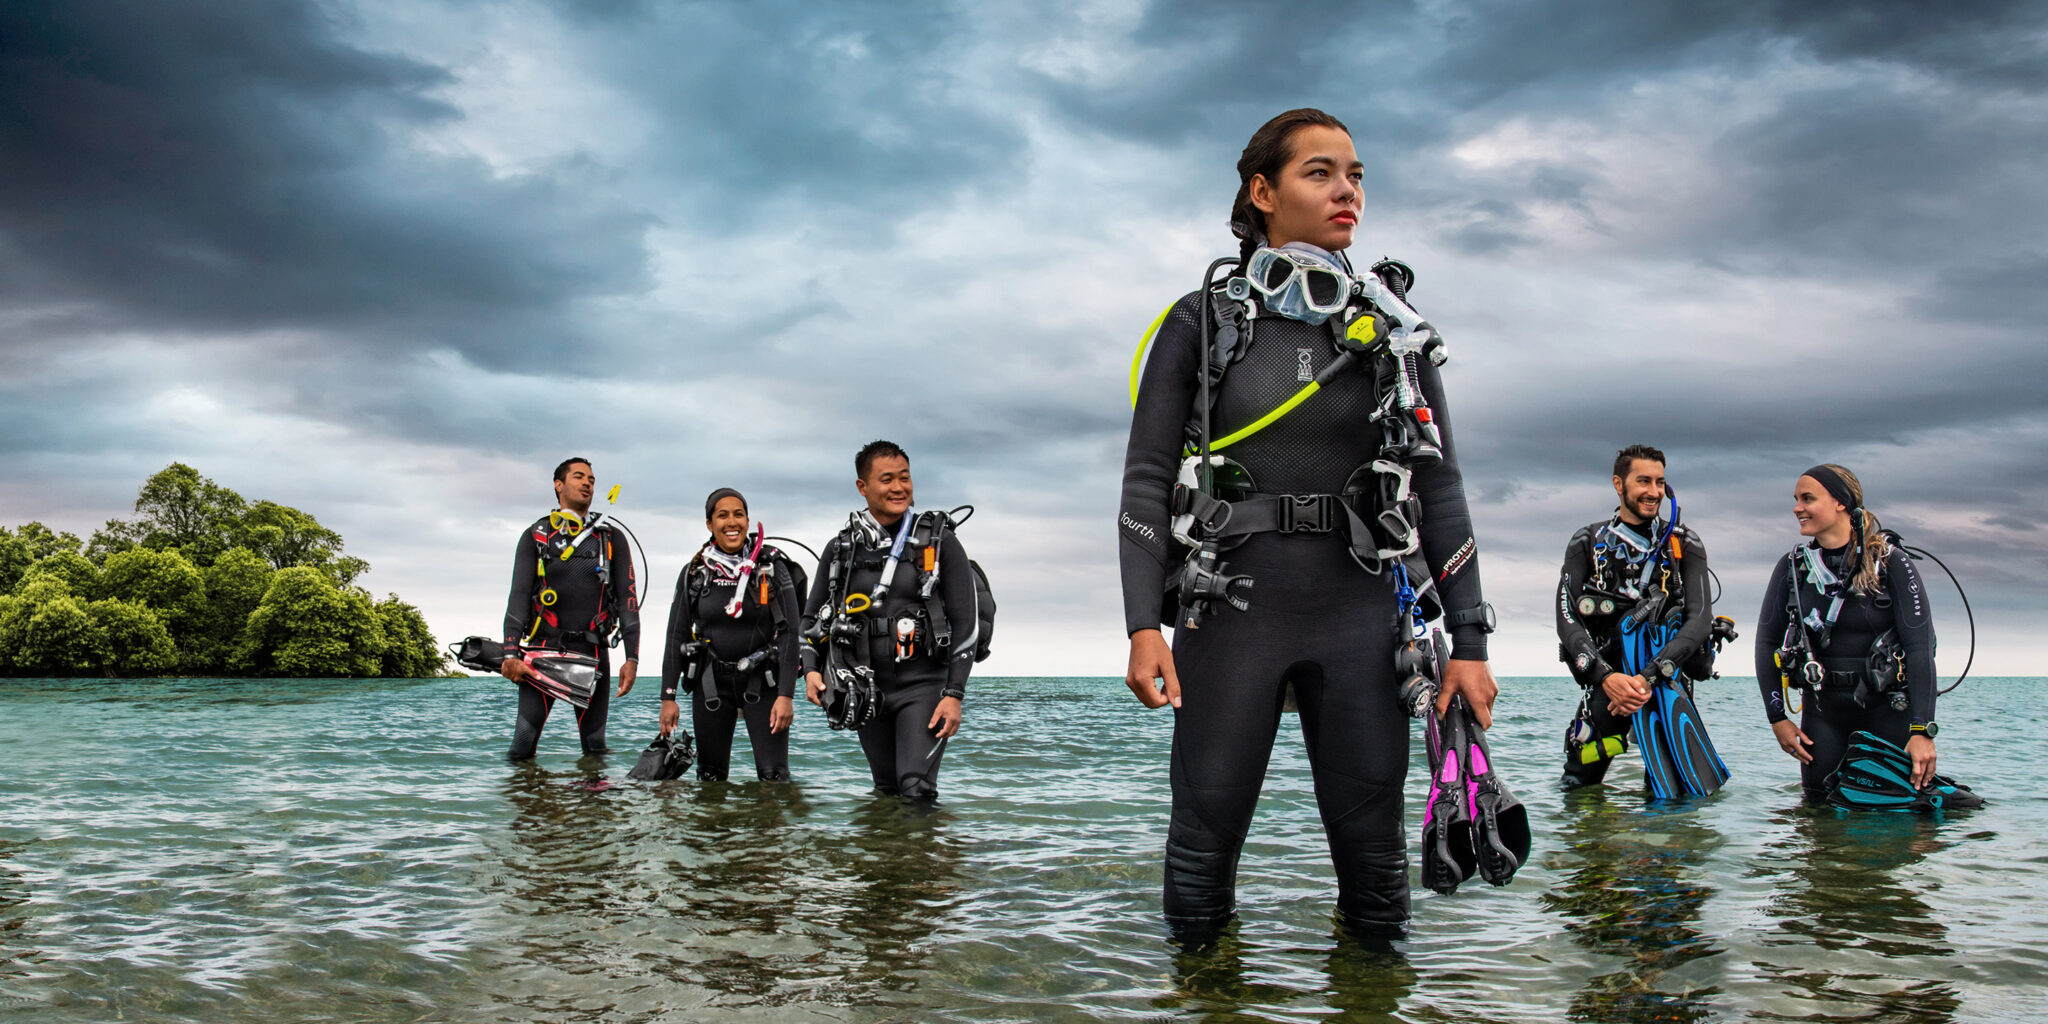 Scuba students with a PADI Professional, who started her career by first going from Discover Scuba Diving to Open Water Diver